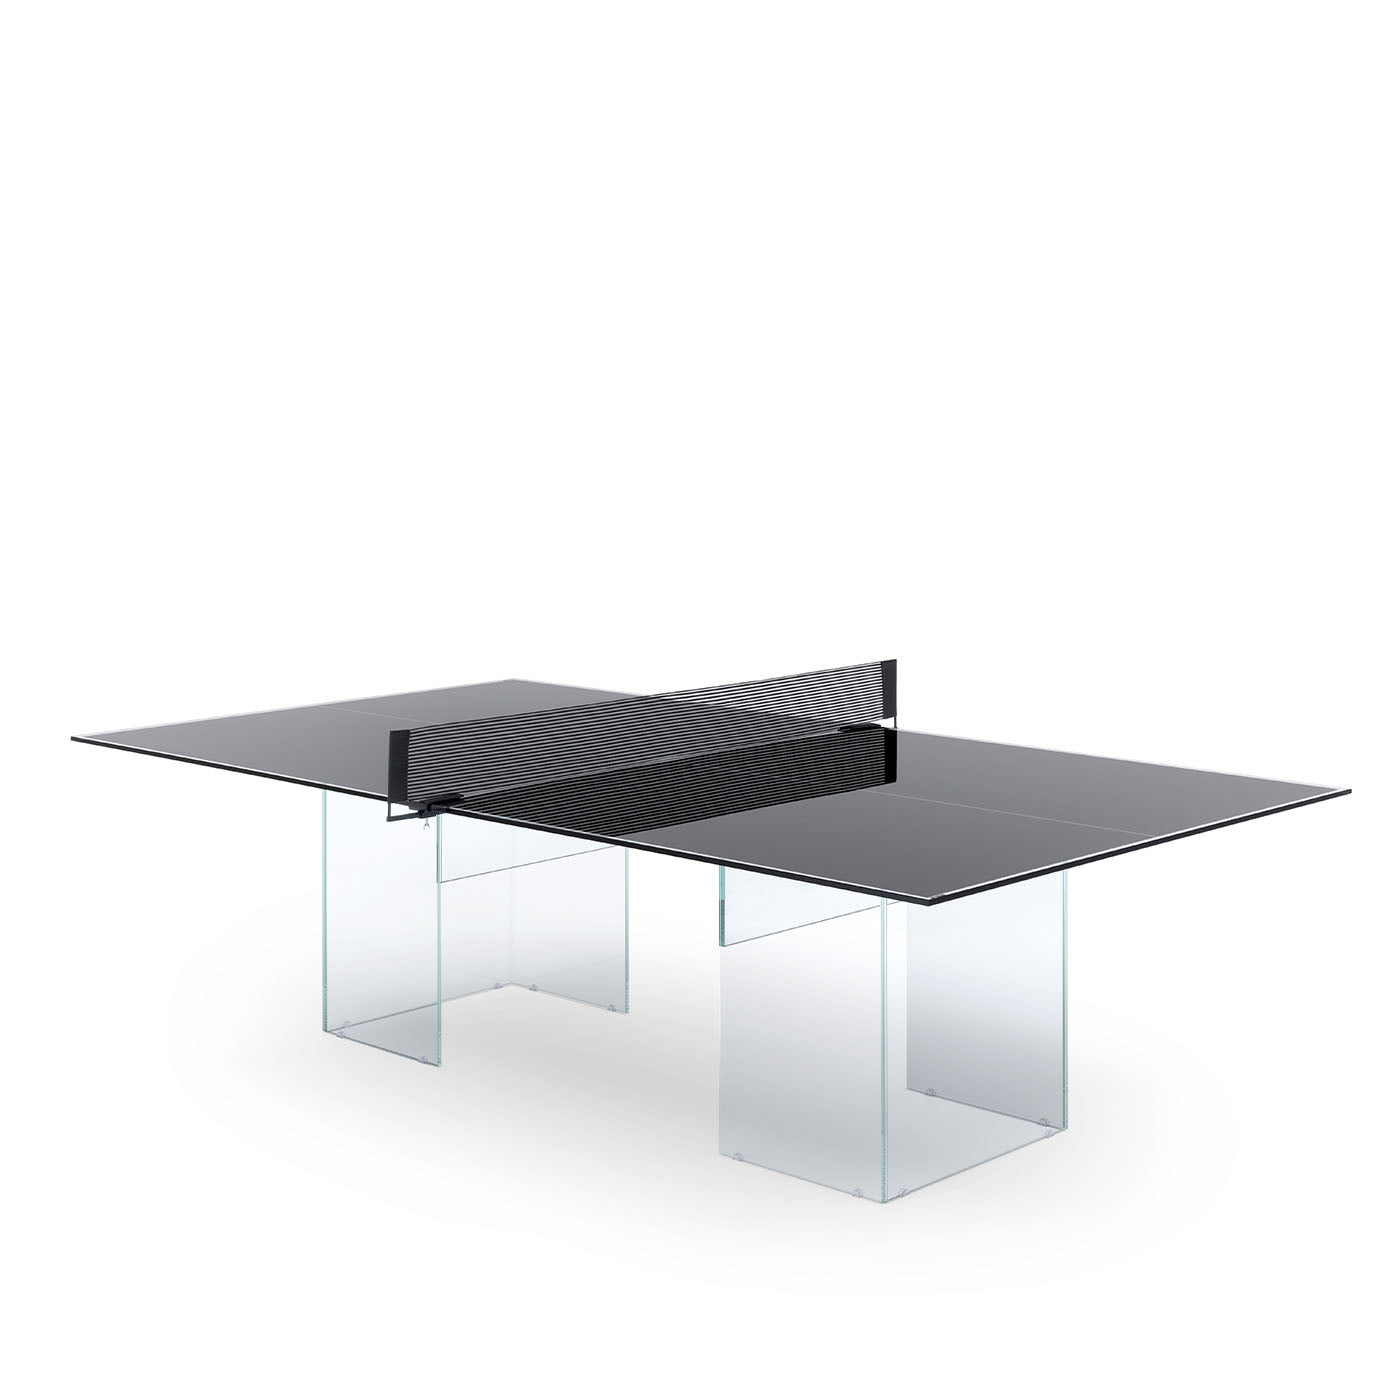 Crystal Black Ping Pong Table - Alternative view 1